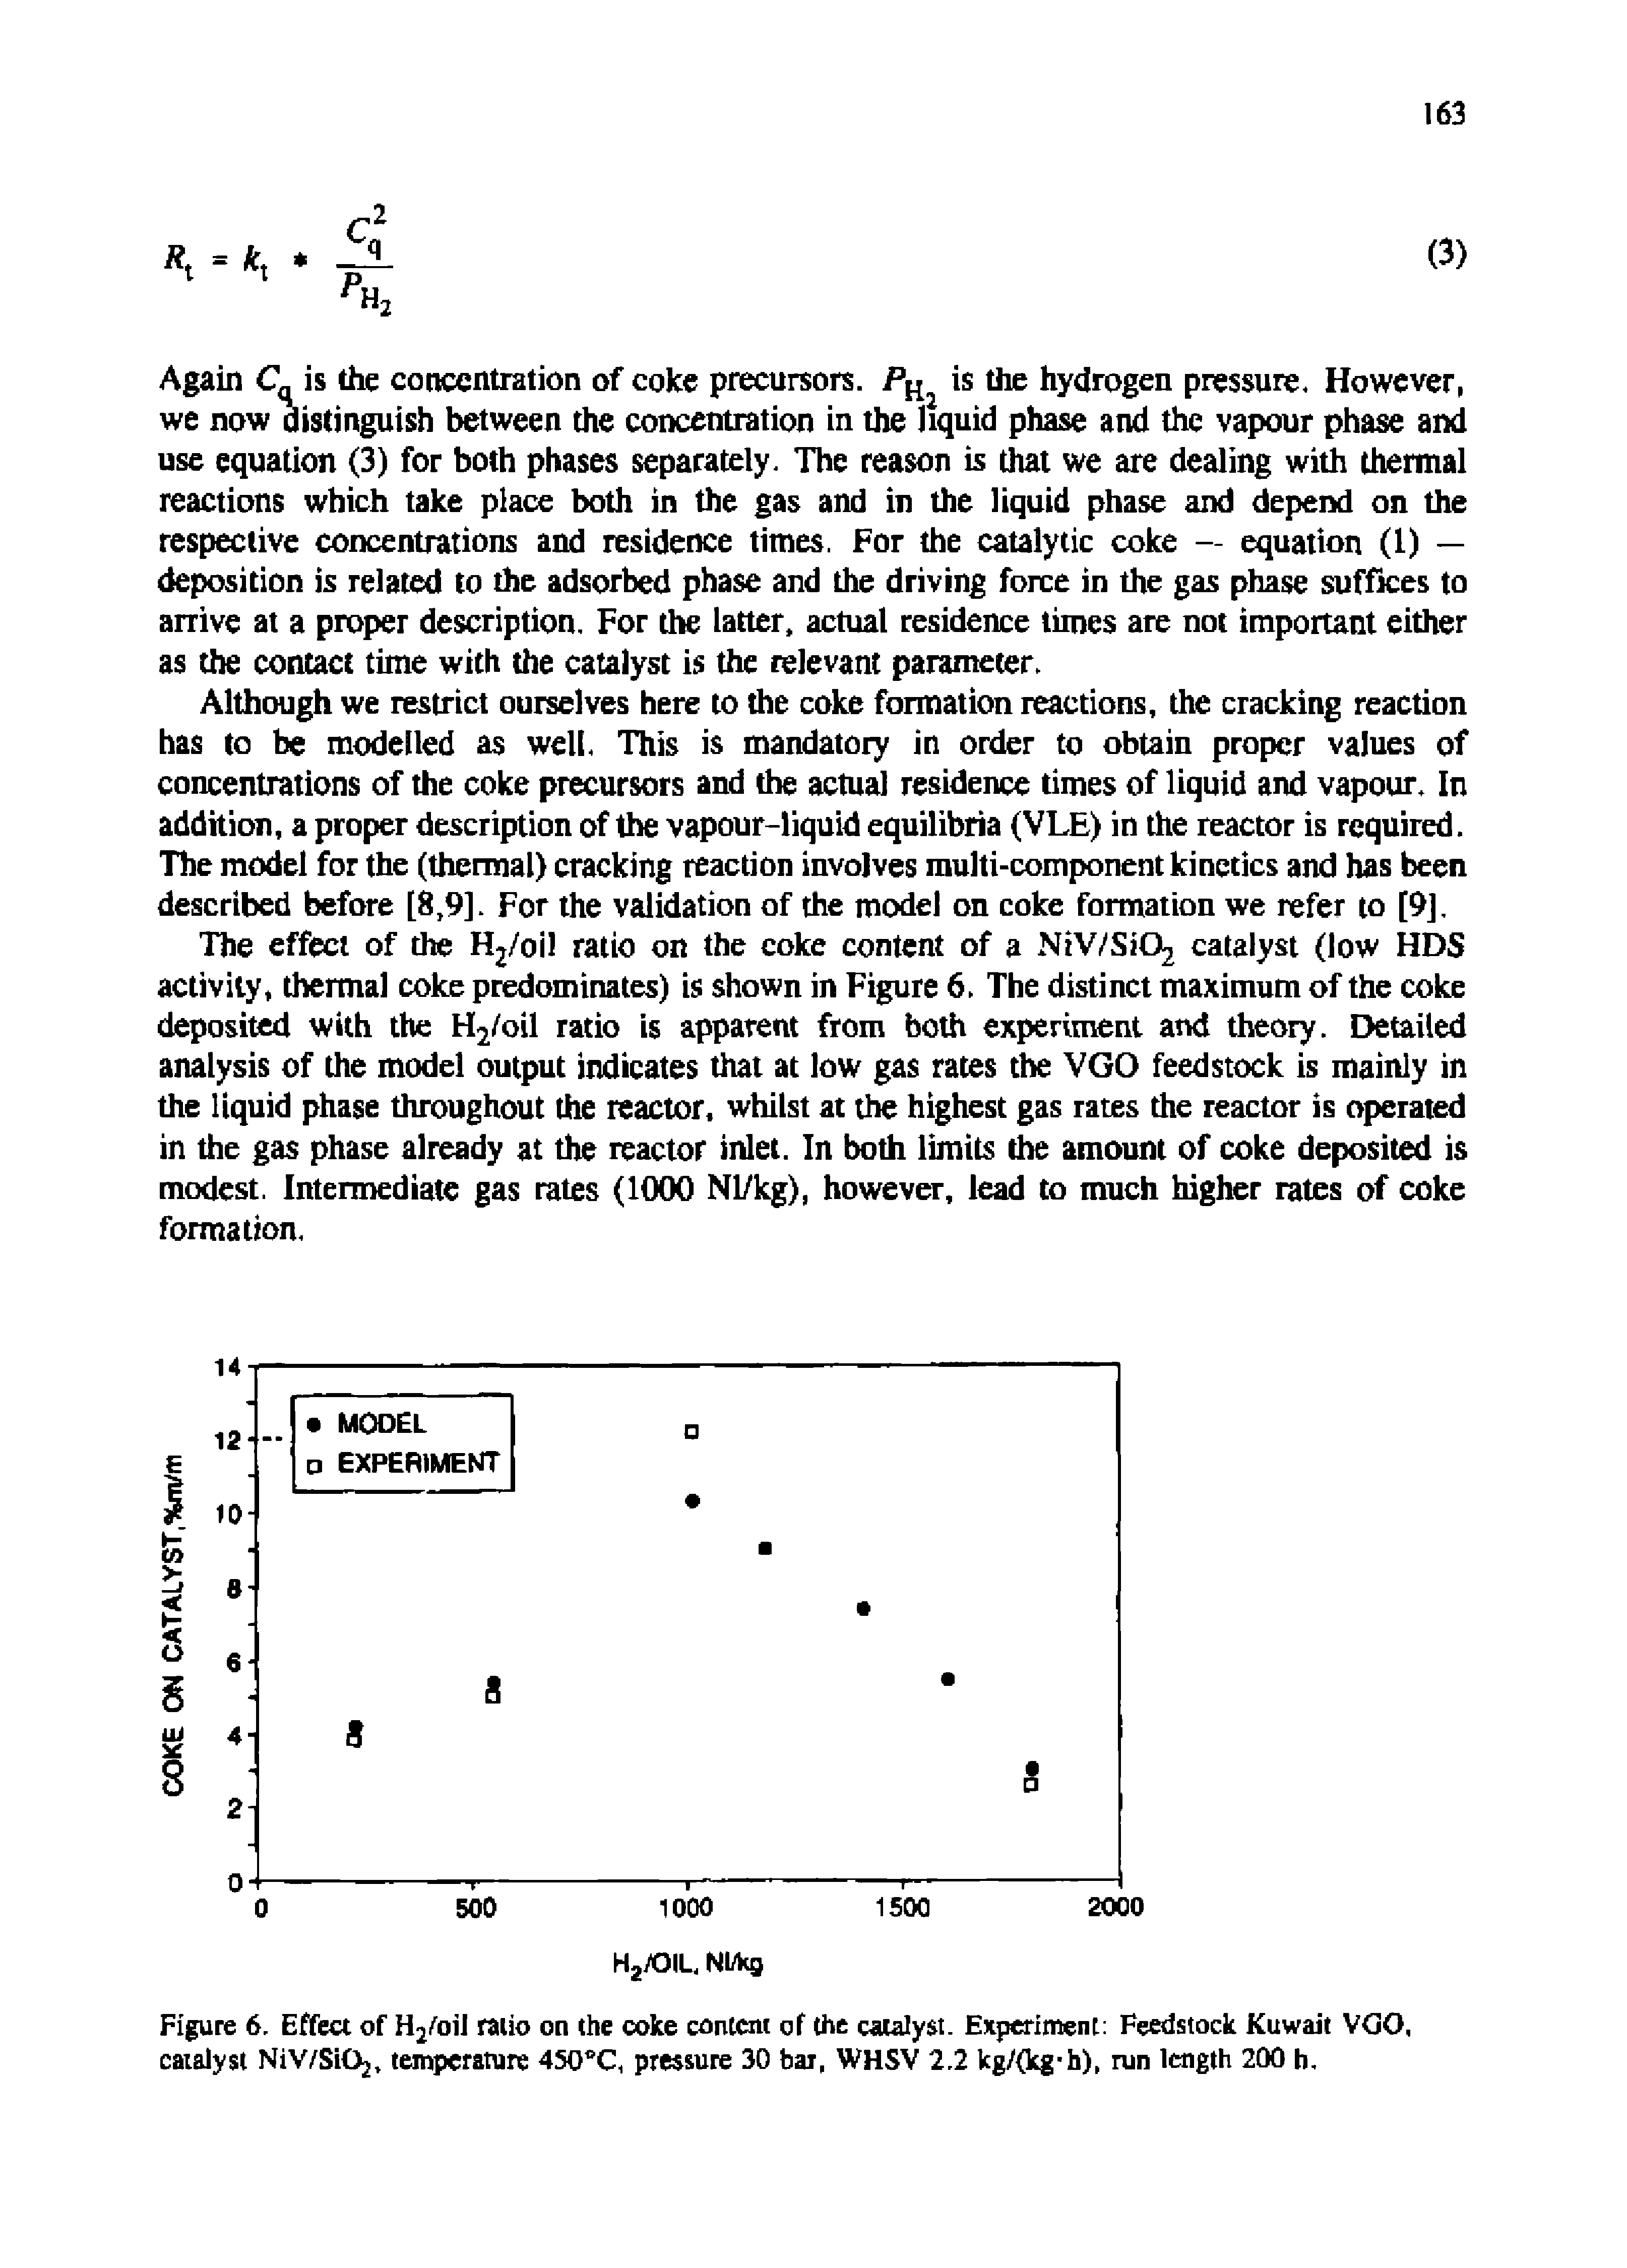 Figure 6. Effect of H2foil ratio on the coke content of the catalyst. Experiment Feedstock Kuwait VGO, catalyst NiV/SiOj, temperature 450 C1 pressure 30 bar, WHSV 2.2 kg/(kg-h), run length 200 h.